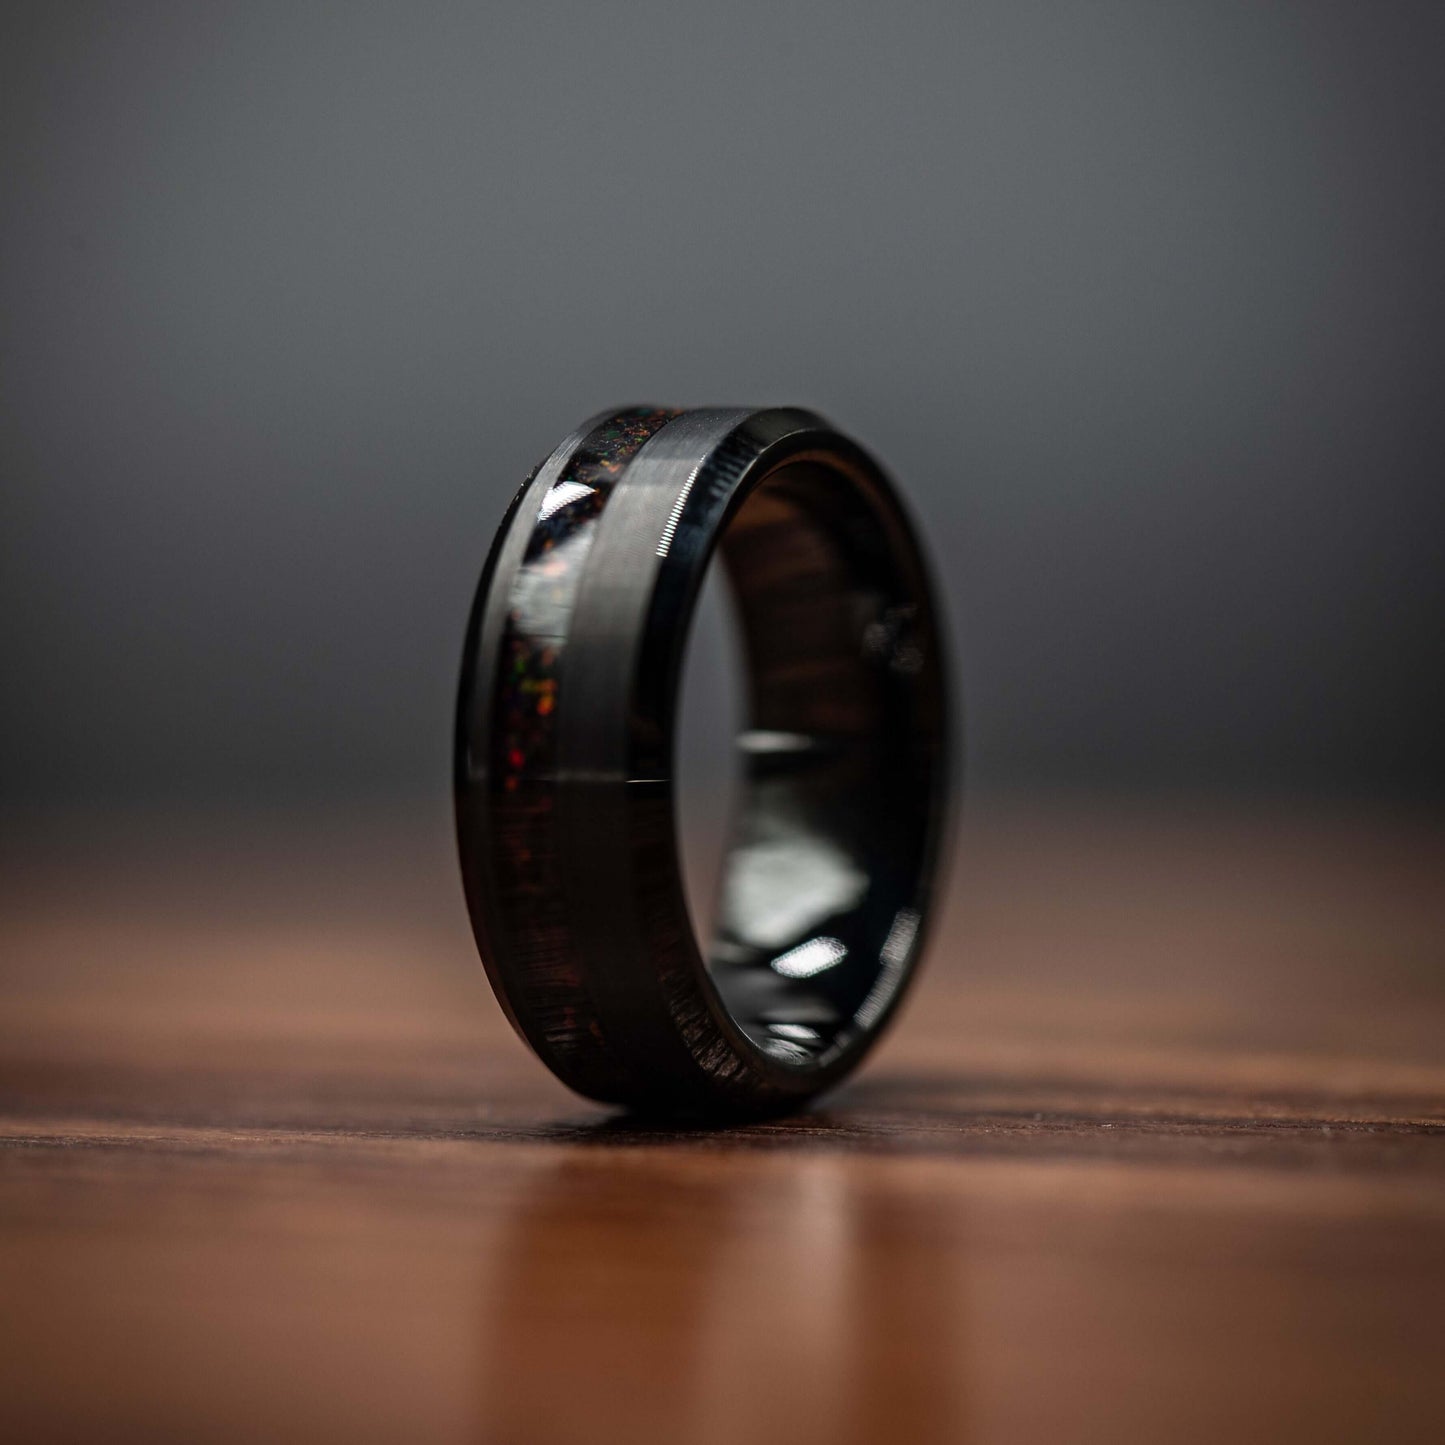 BLACK FIRE OPAL, Black Brushed Tungsten and fire opal ring, Black and Fire Opal Band, Unique Ring, Mens Wedding Band, Tungsten Ring 8MM